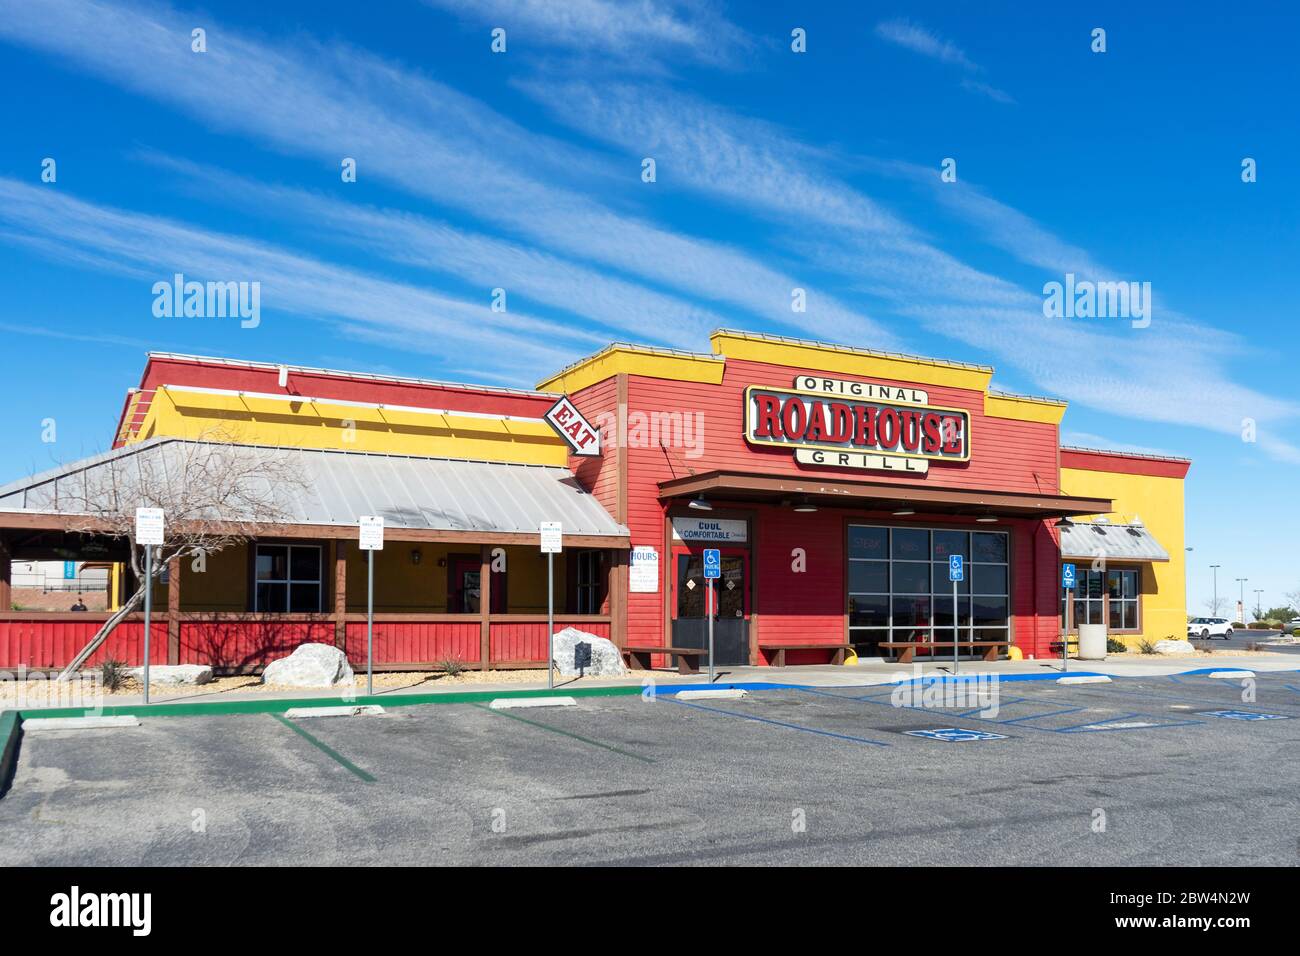 Victorville, CA / USA – February 11, 2020: Original Roadhouse Grill  restaurant exterior building located in Victorville, California, adjacent to Inte Stock Photo